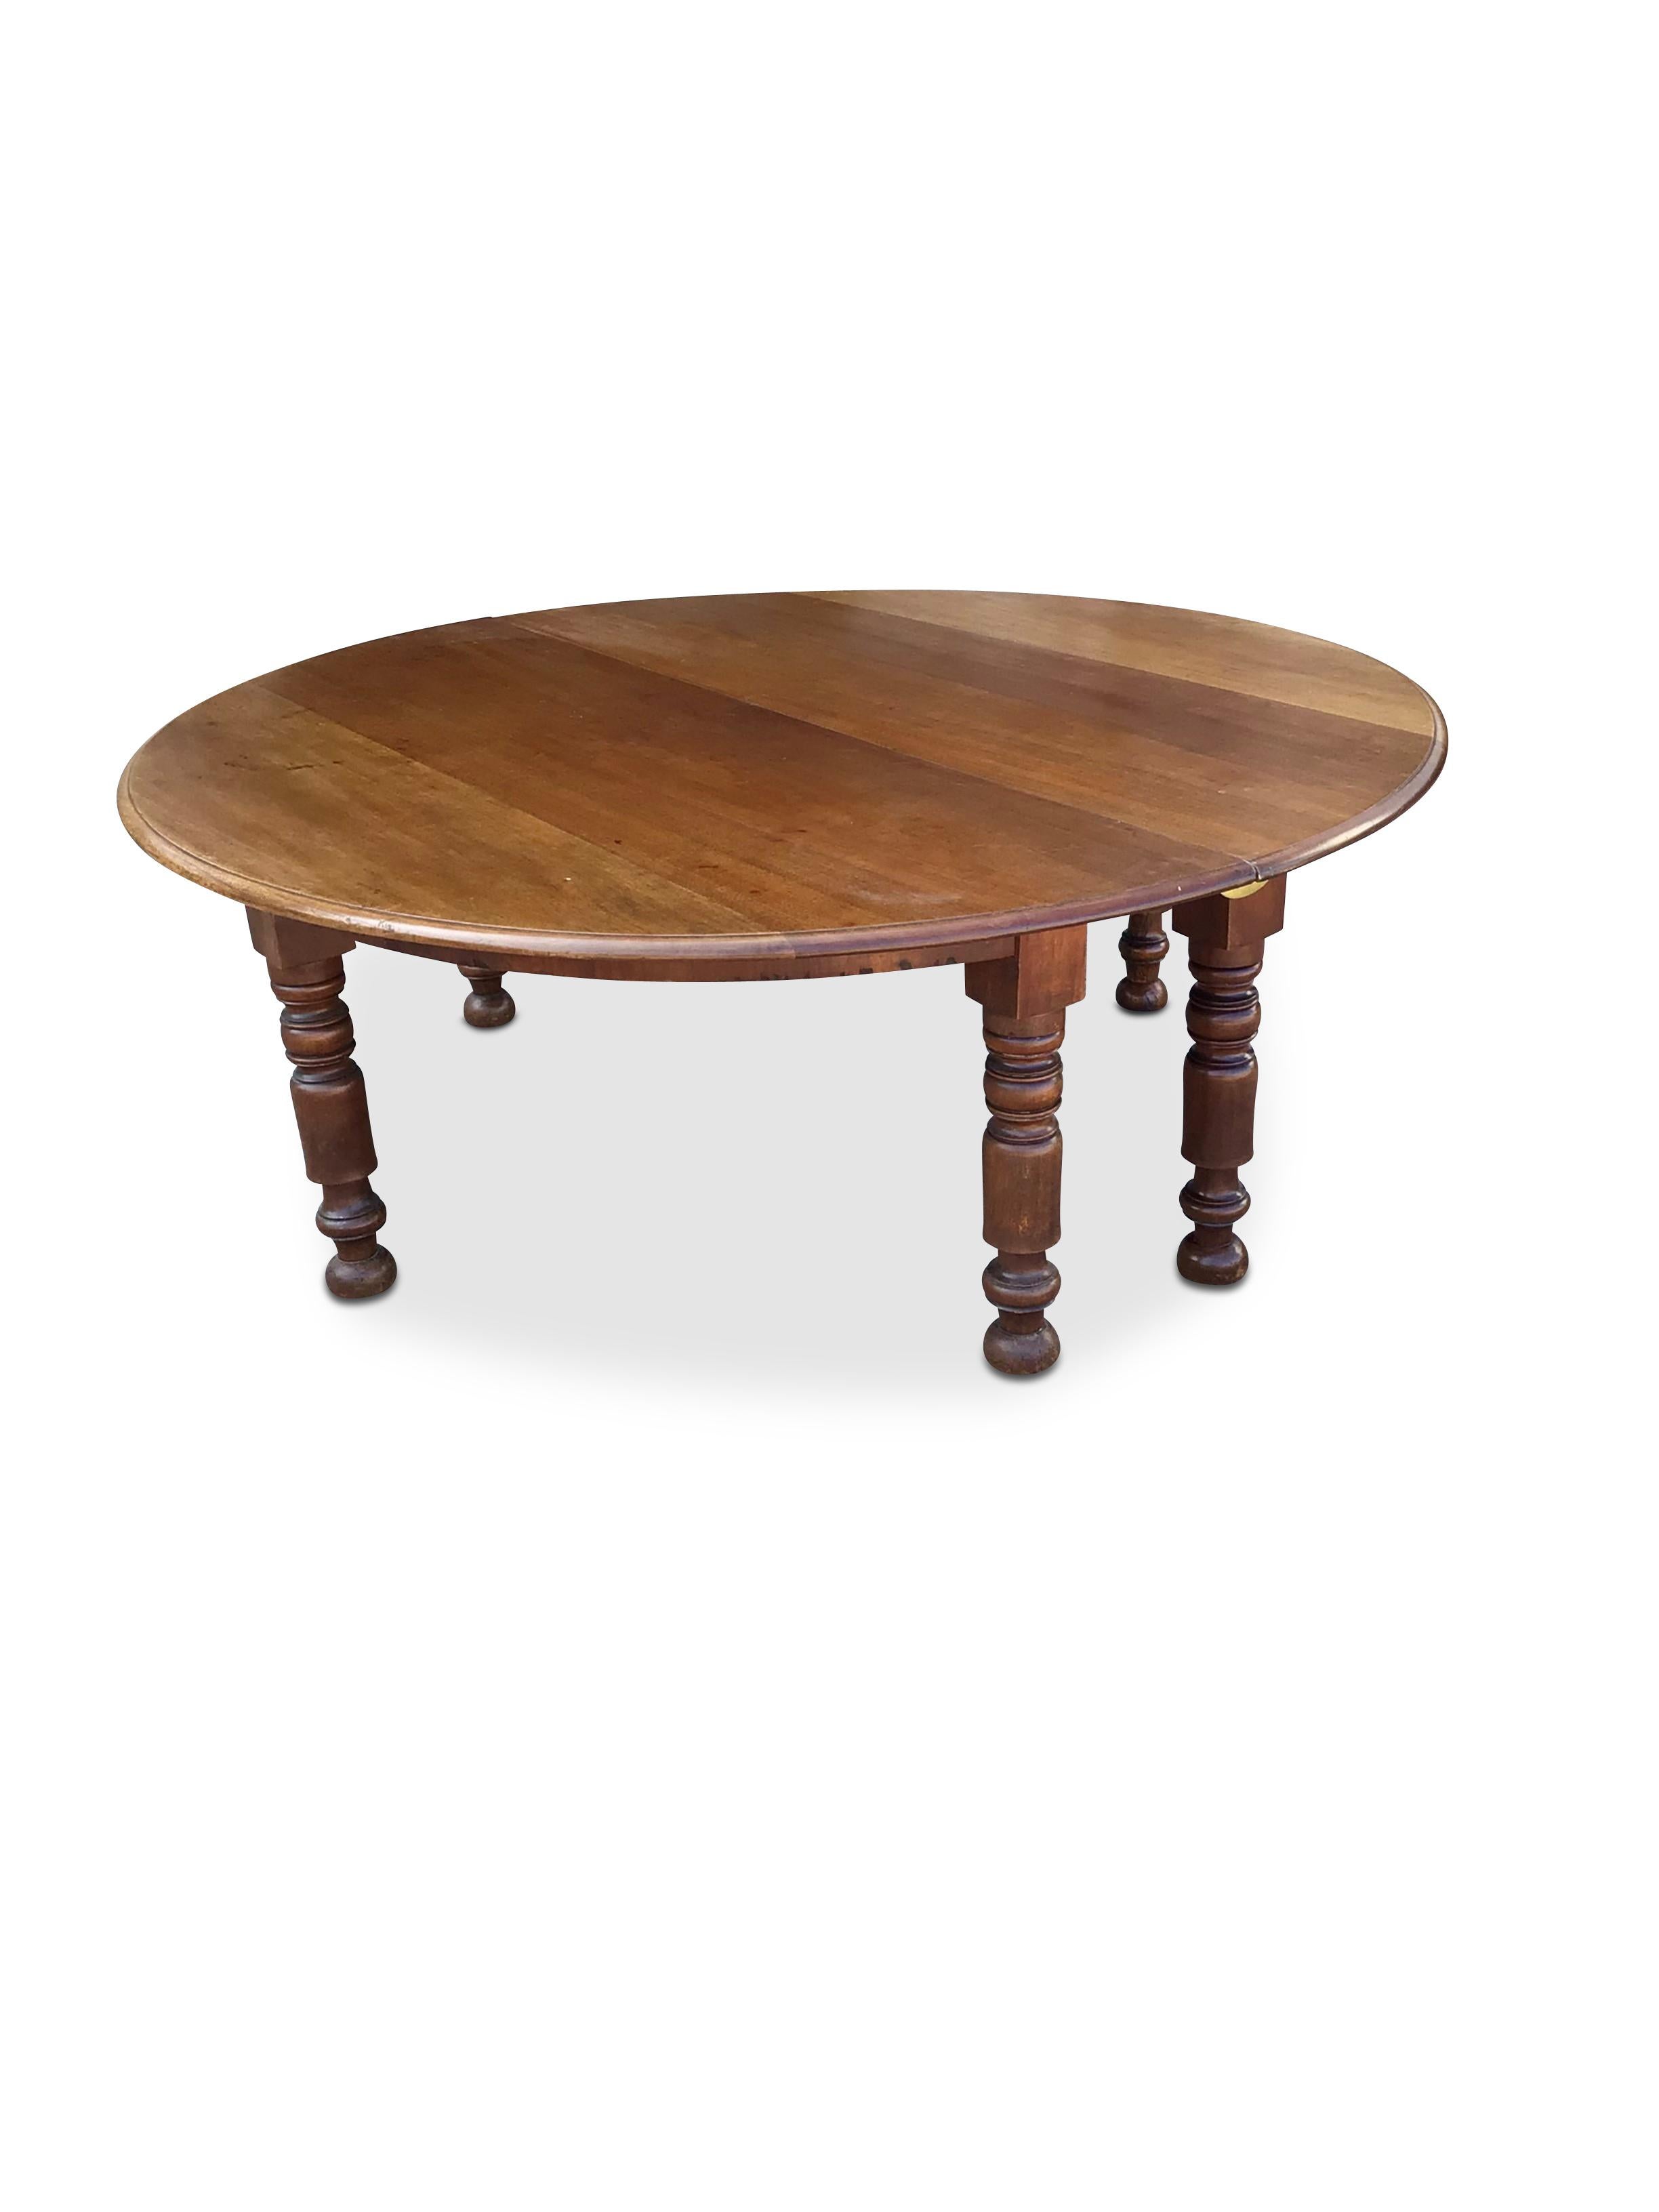 Walnut C19th large round table For Sale